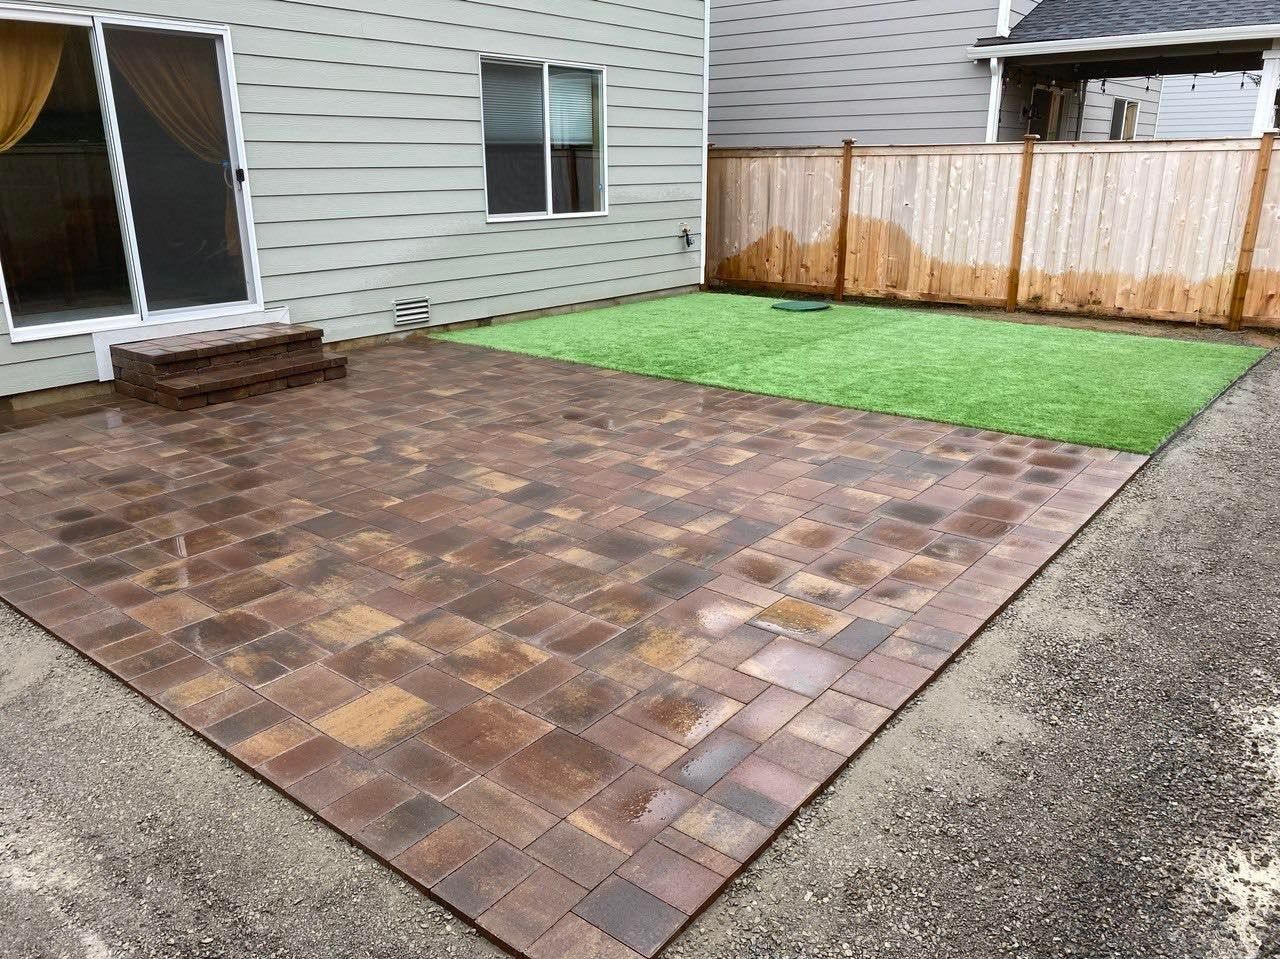 newly cleaned pavers